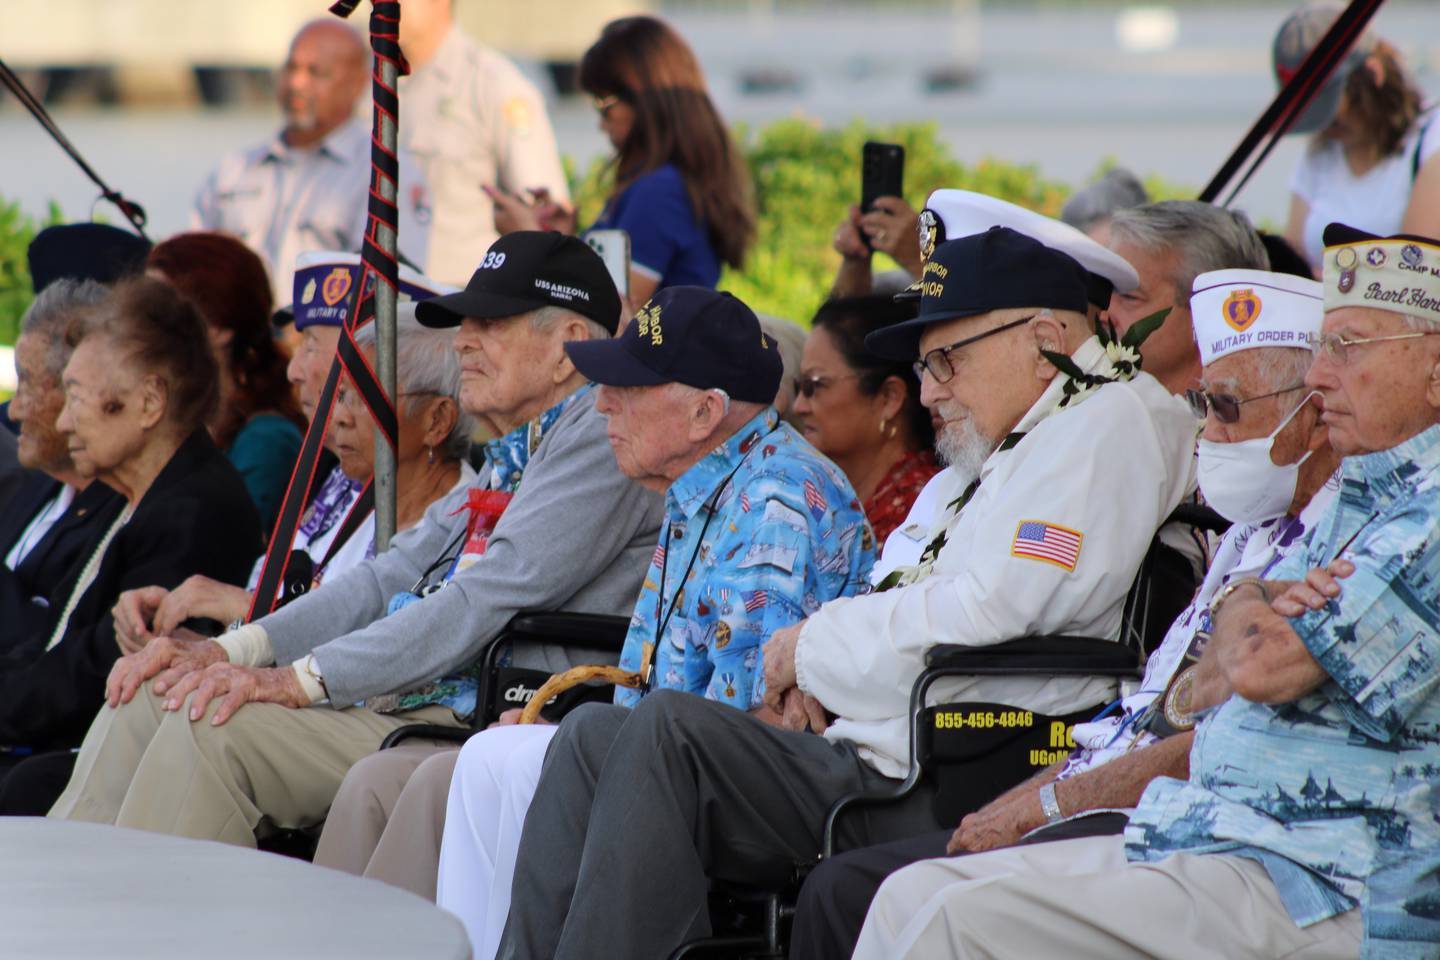 Pearl Harbor survivors and other military veterans observe a ceremony on Wednesday, Dec. 7, 2022, in Pearl Harbor, Hawaii in remembrance of those killed in the 1941 attack.